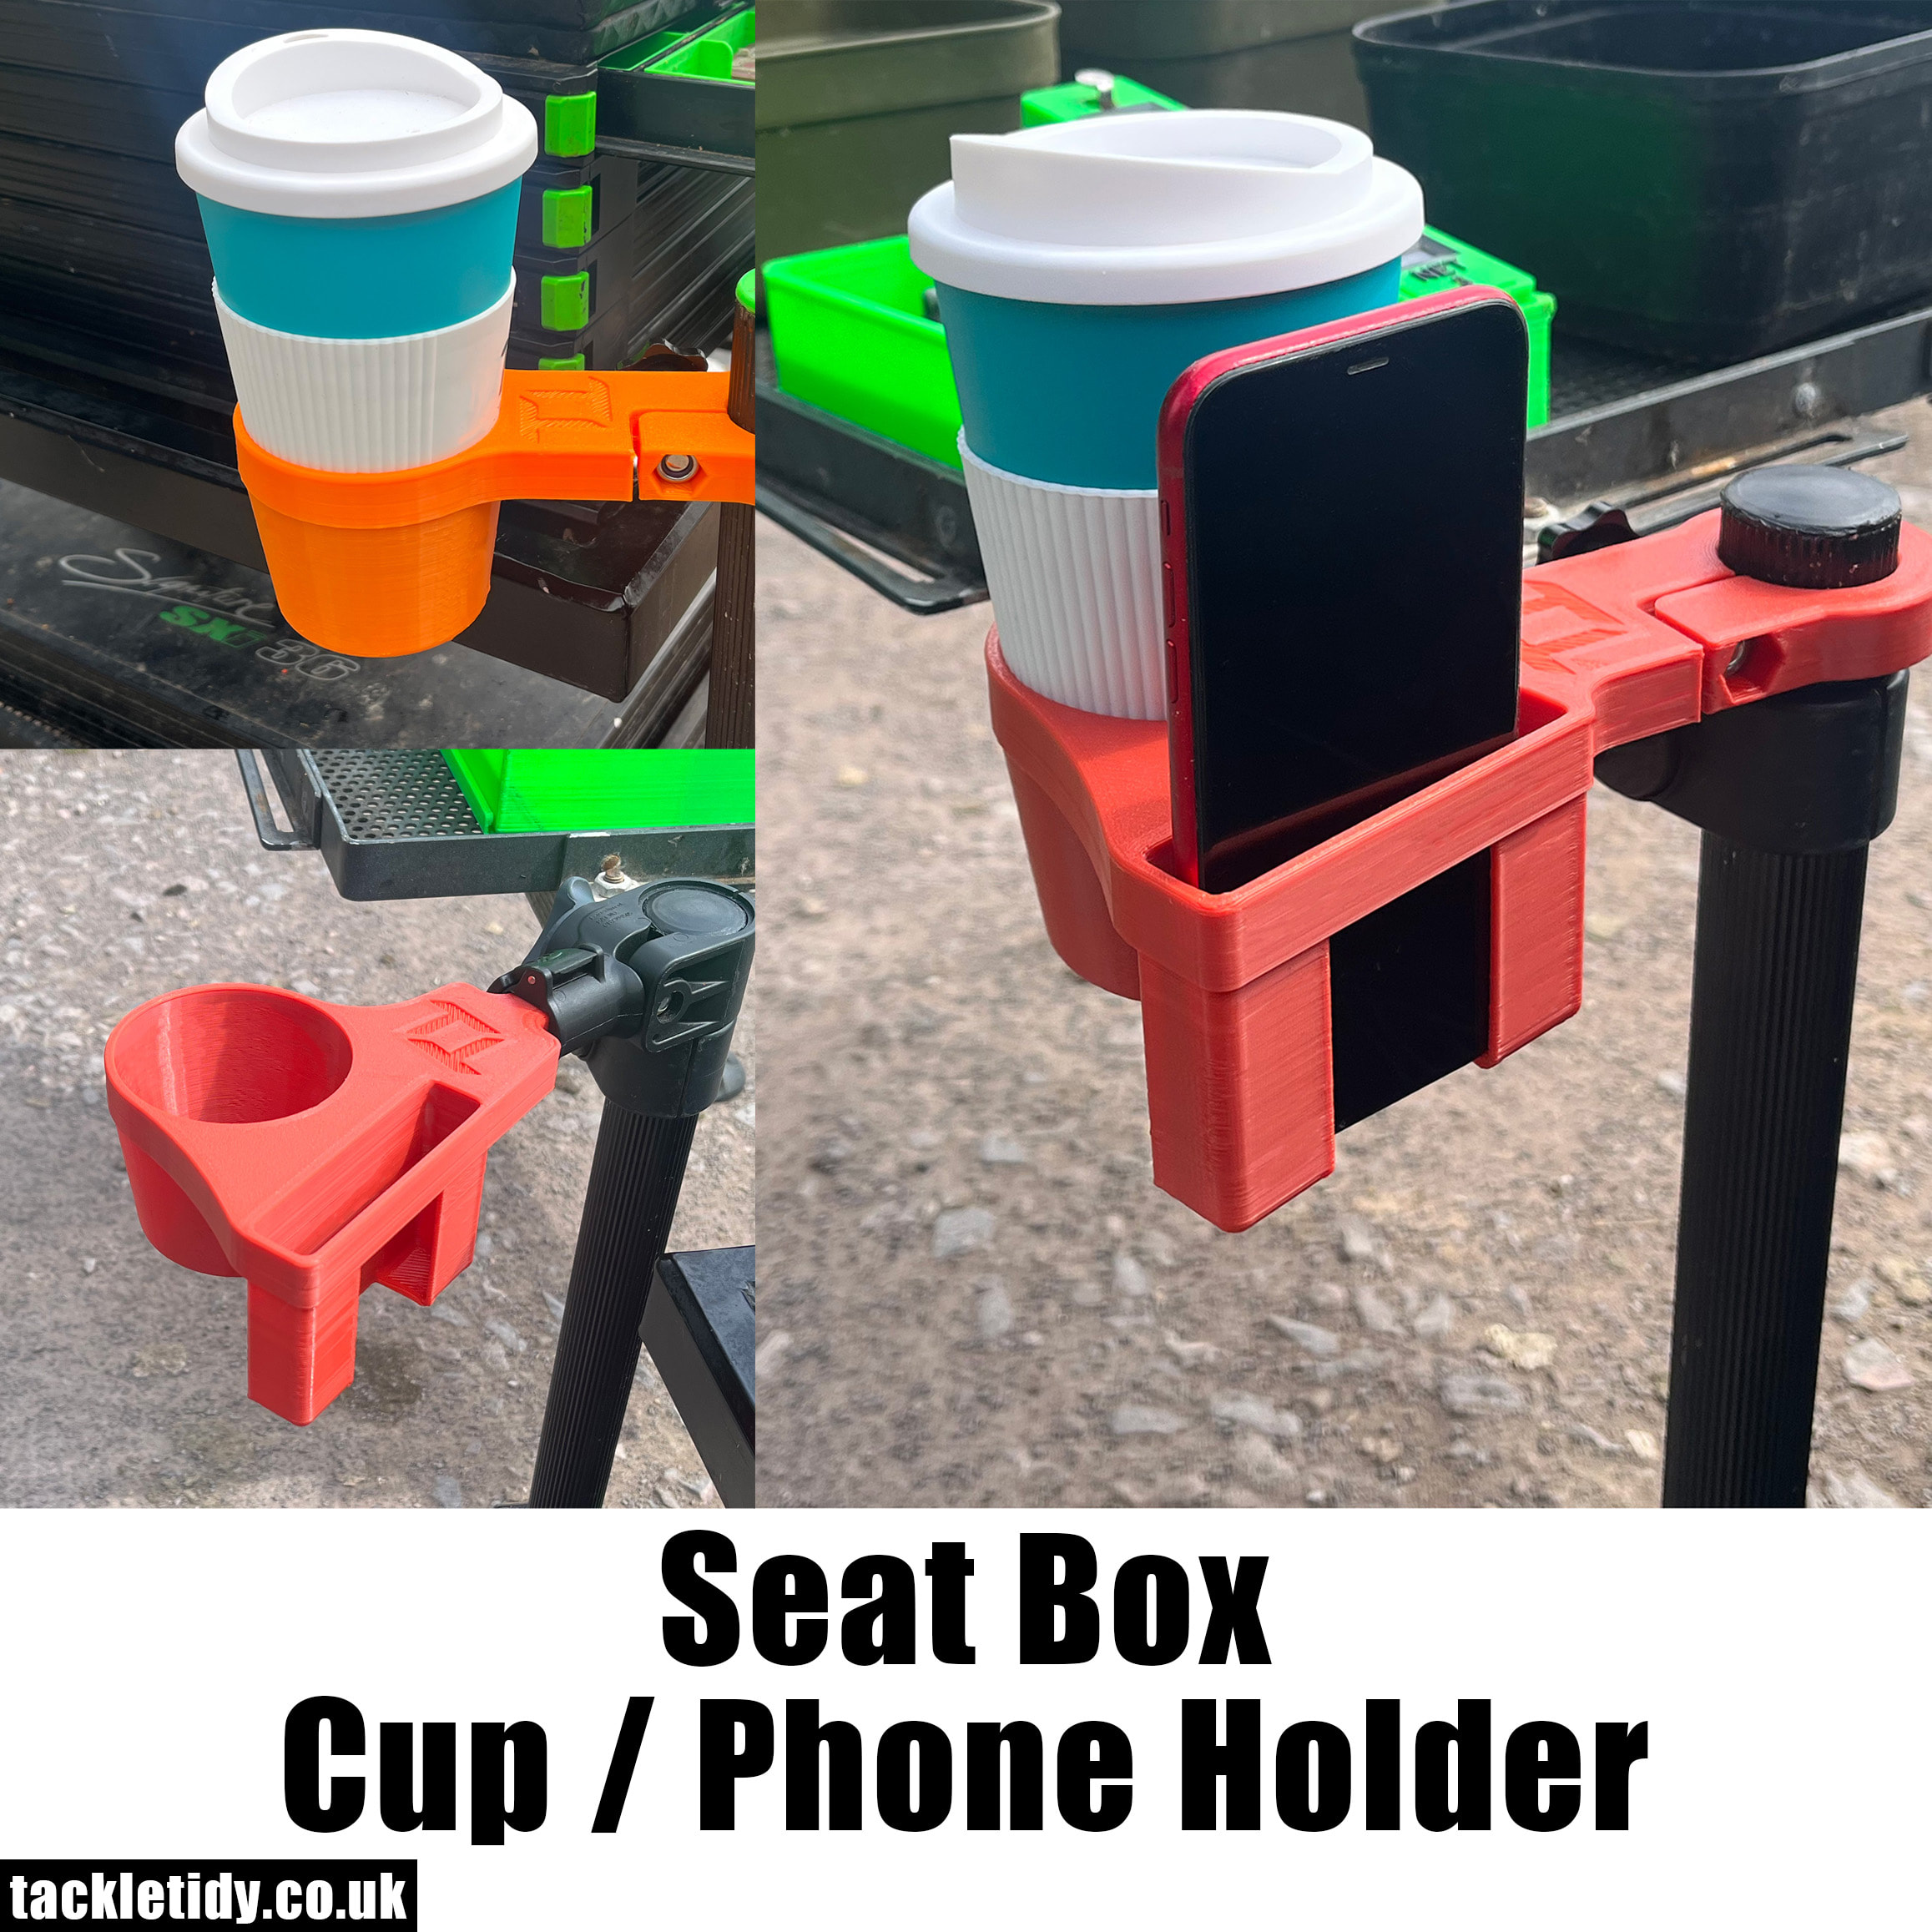 Cup Holder